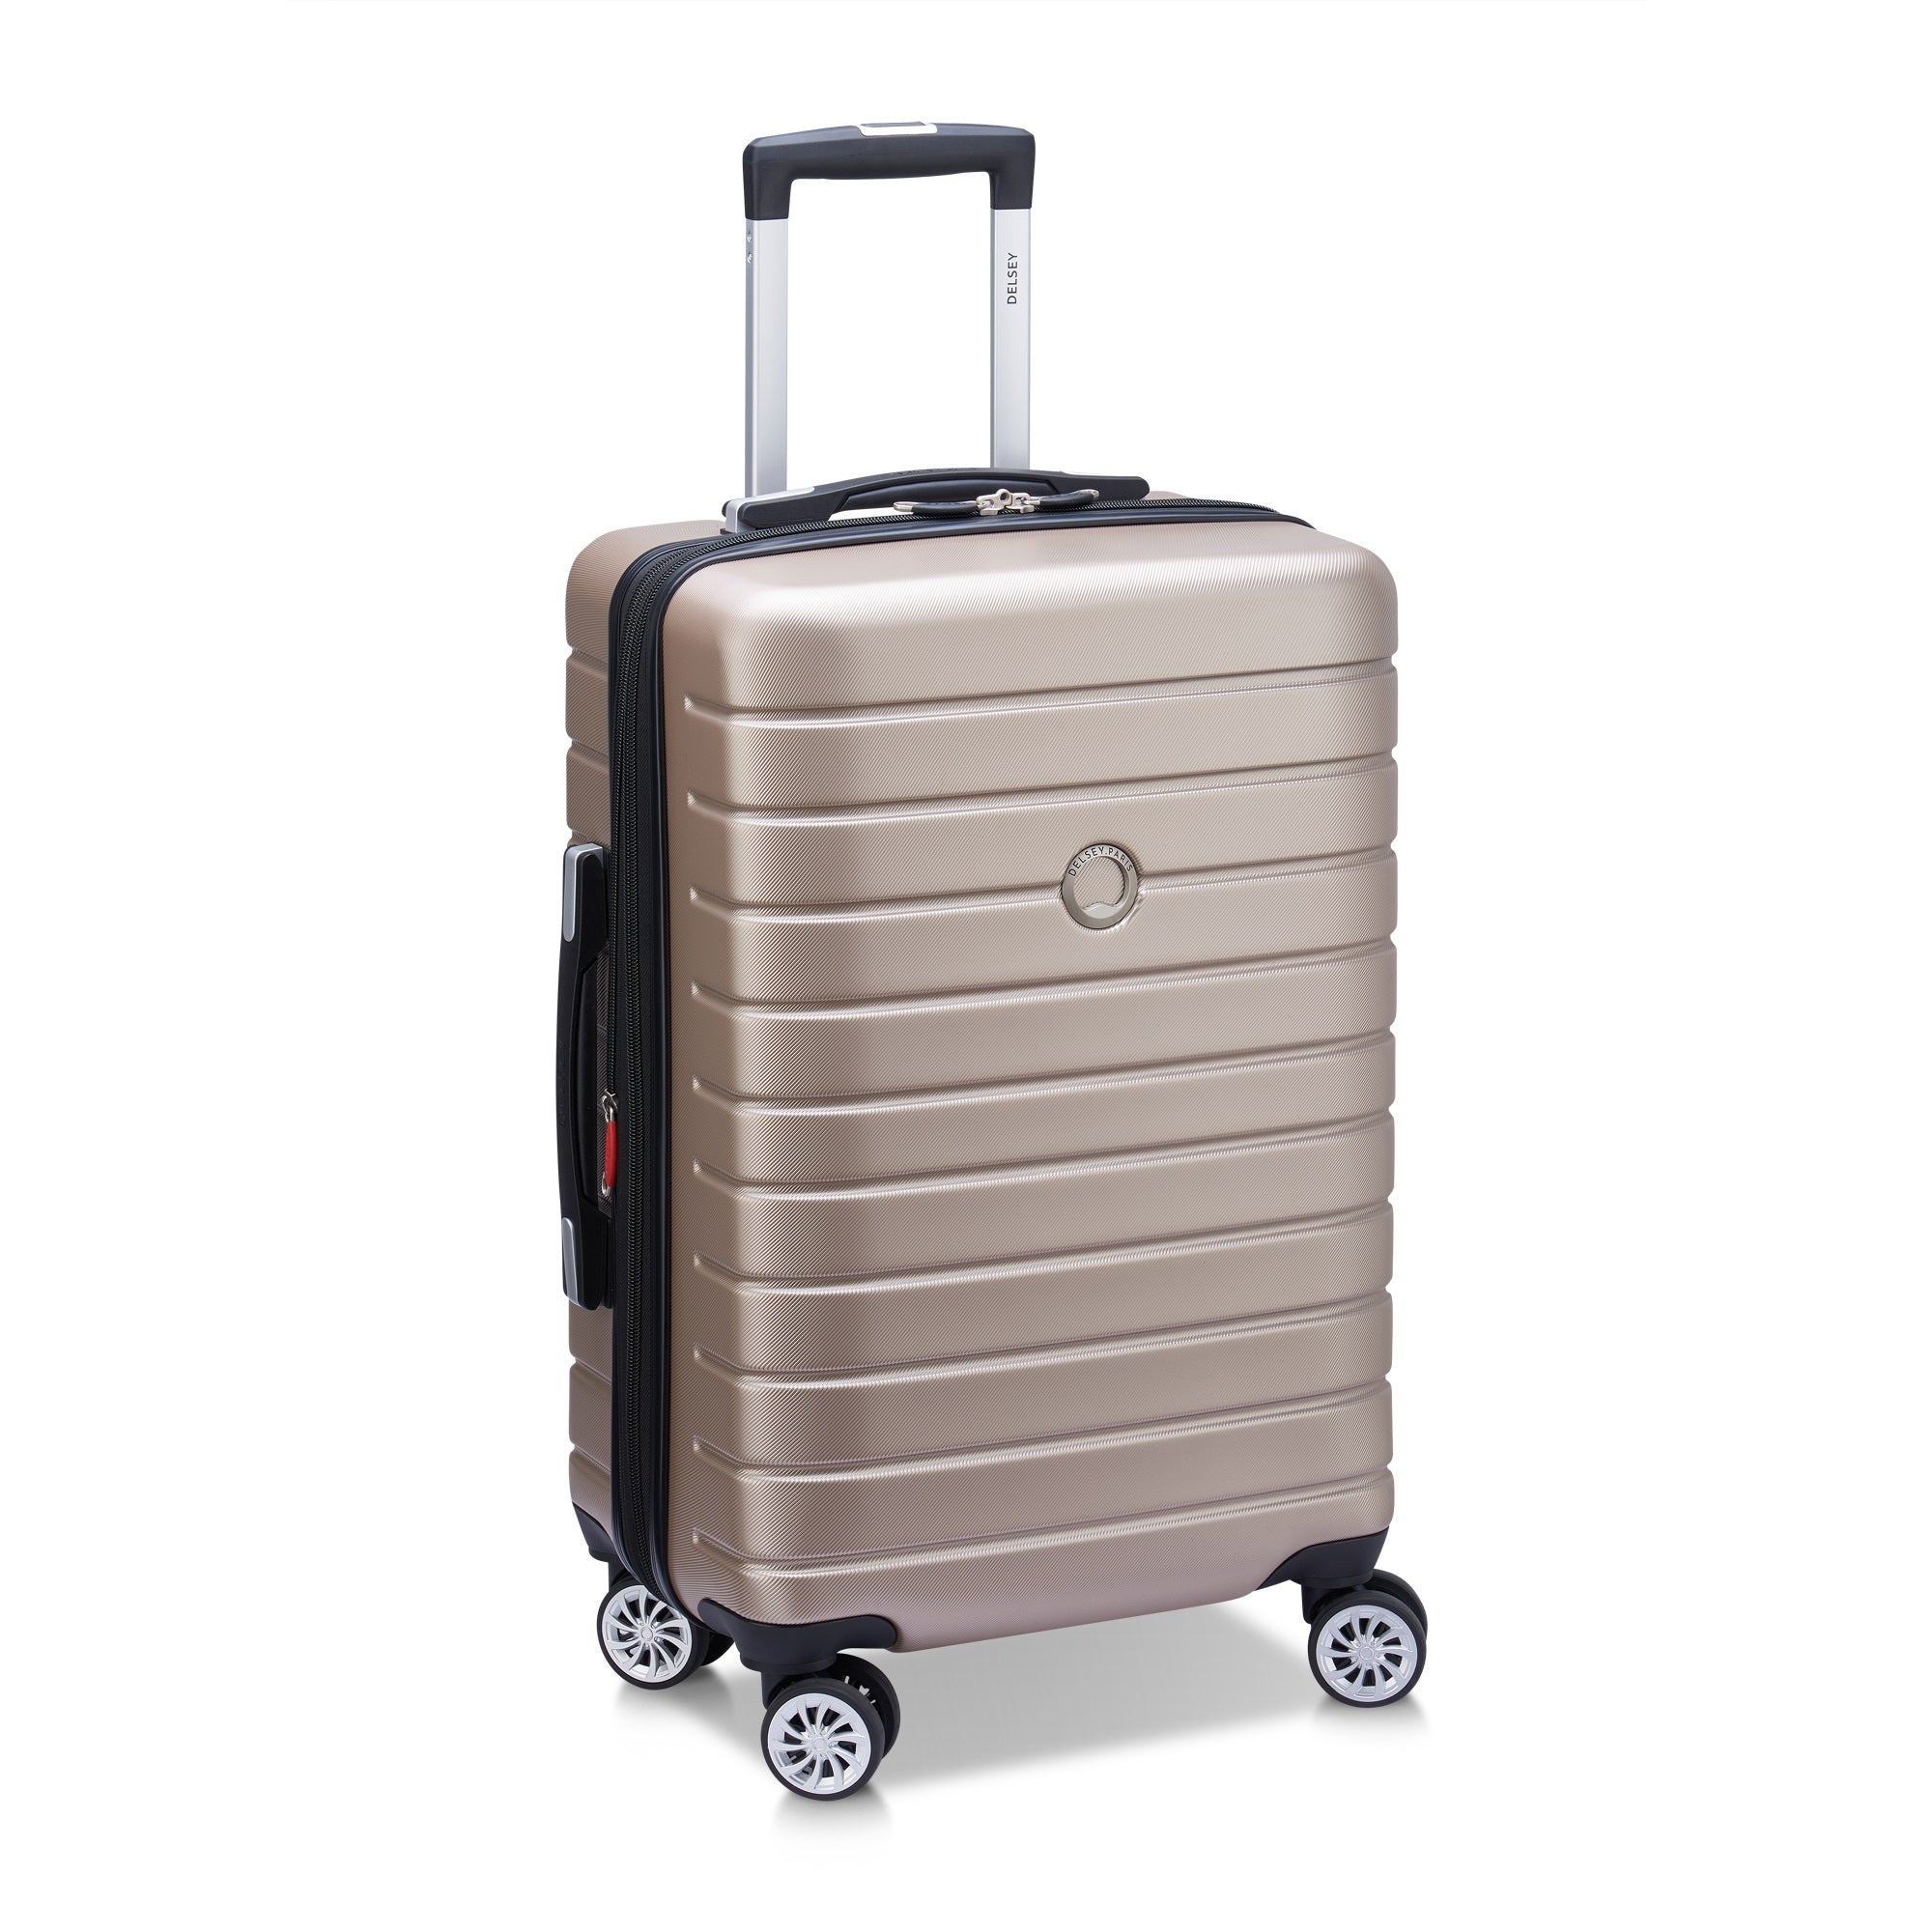 Delsey suitcases  Fashion bags, Delsey suitcase, Bags